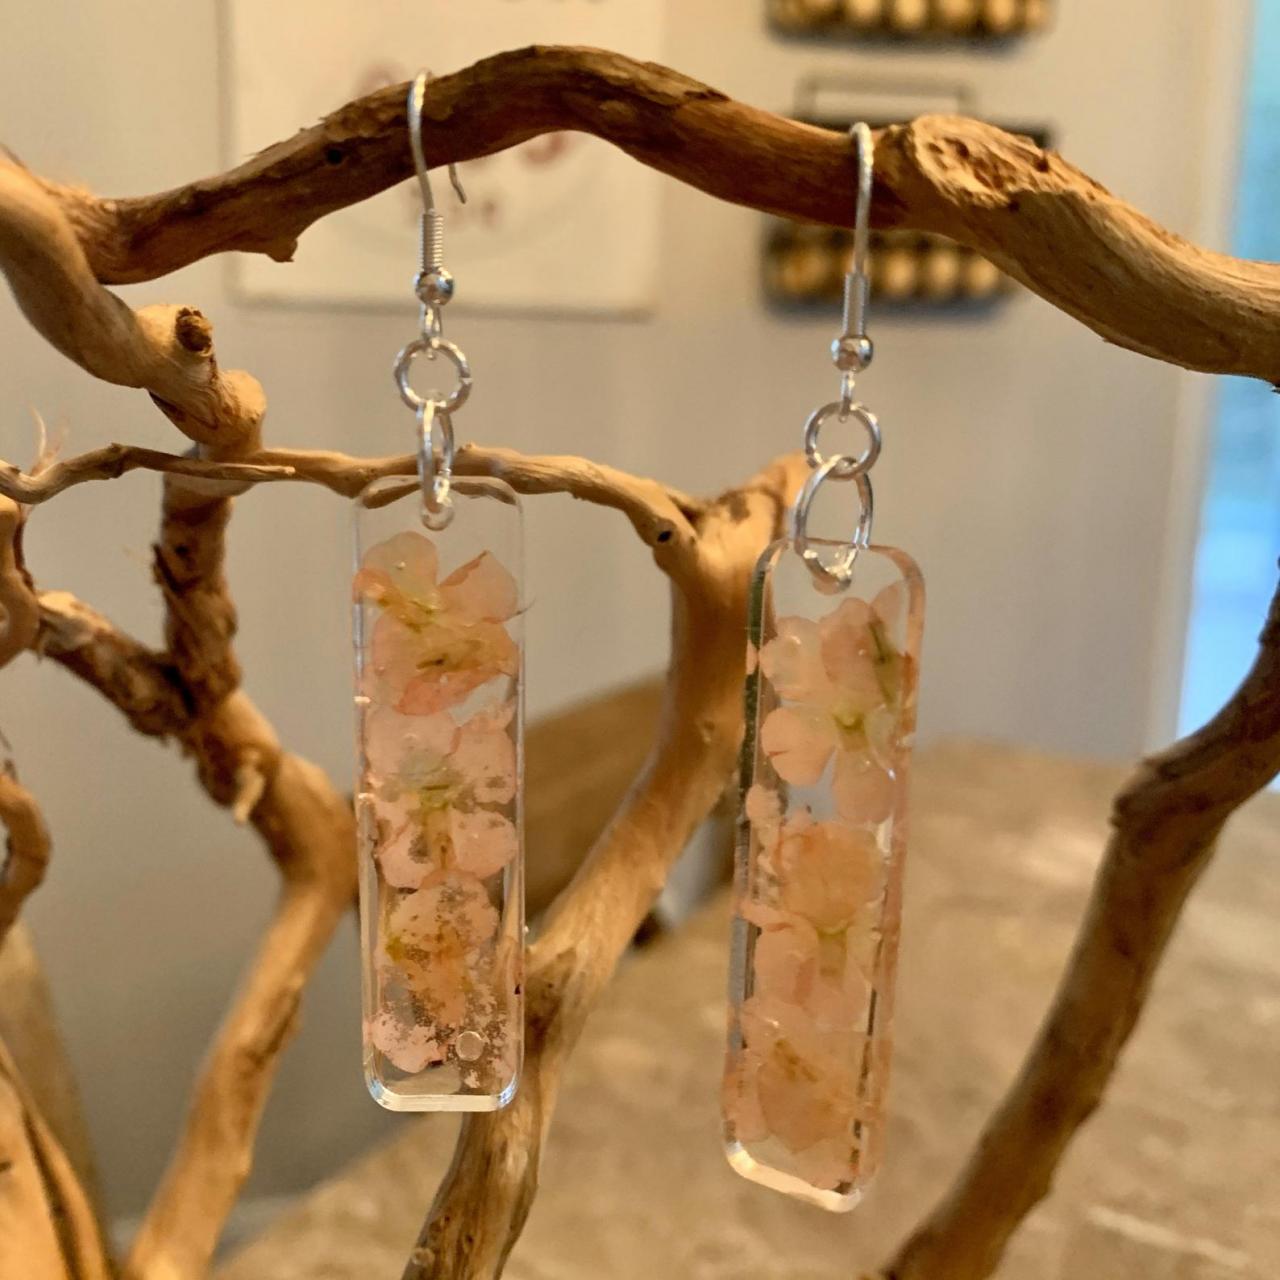 Pressed Flowers Earrings, Resin Flower Jewelry,gift For Graduation, Preserved Flowers, Boho, Minimalist Jewelry Gifts, Nature Gift, Botanic